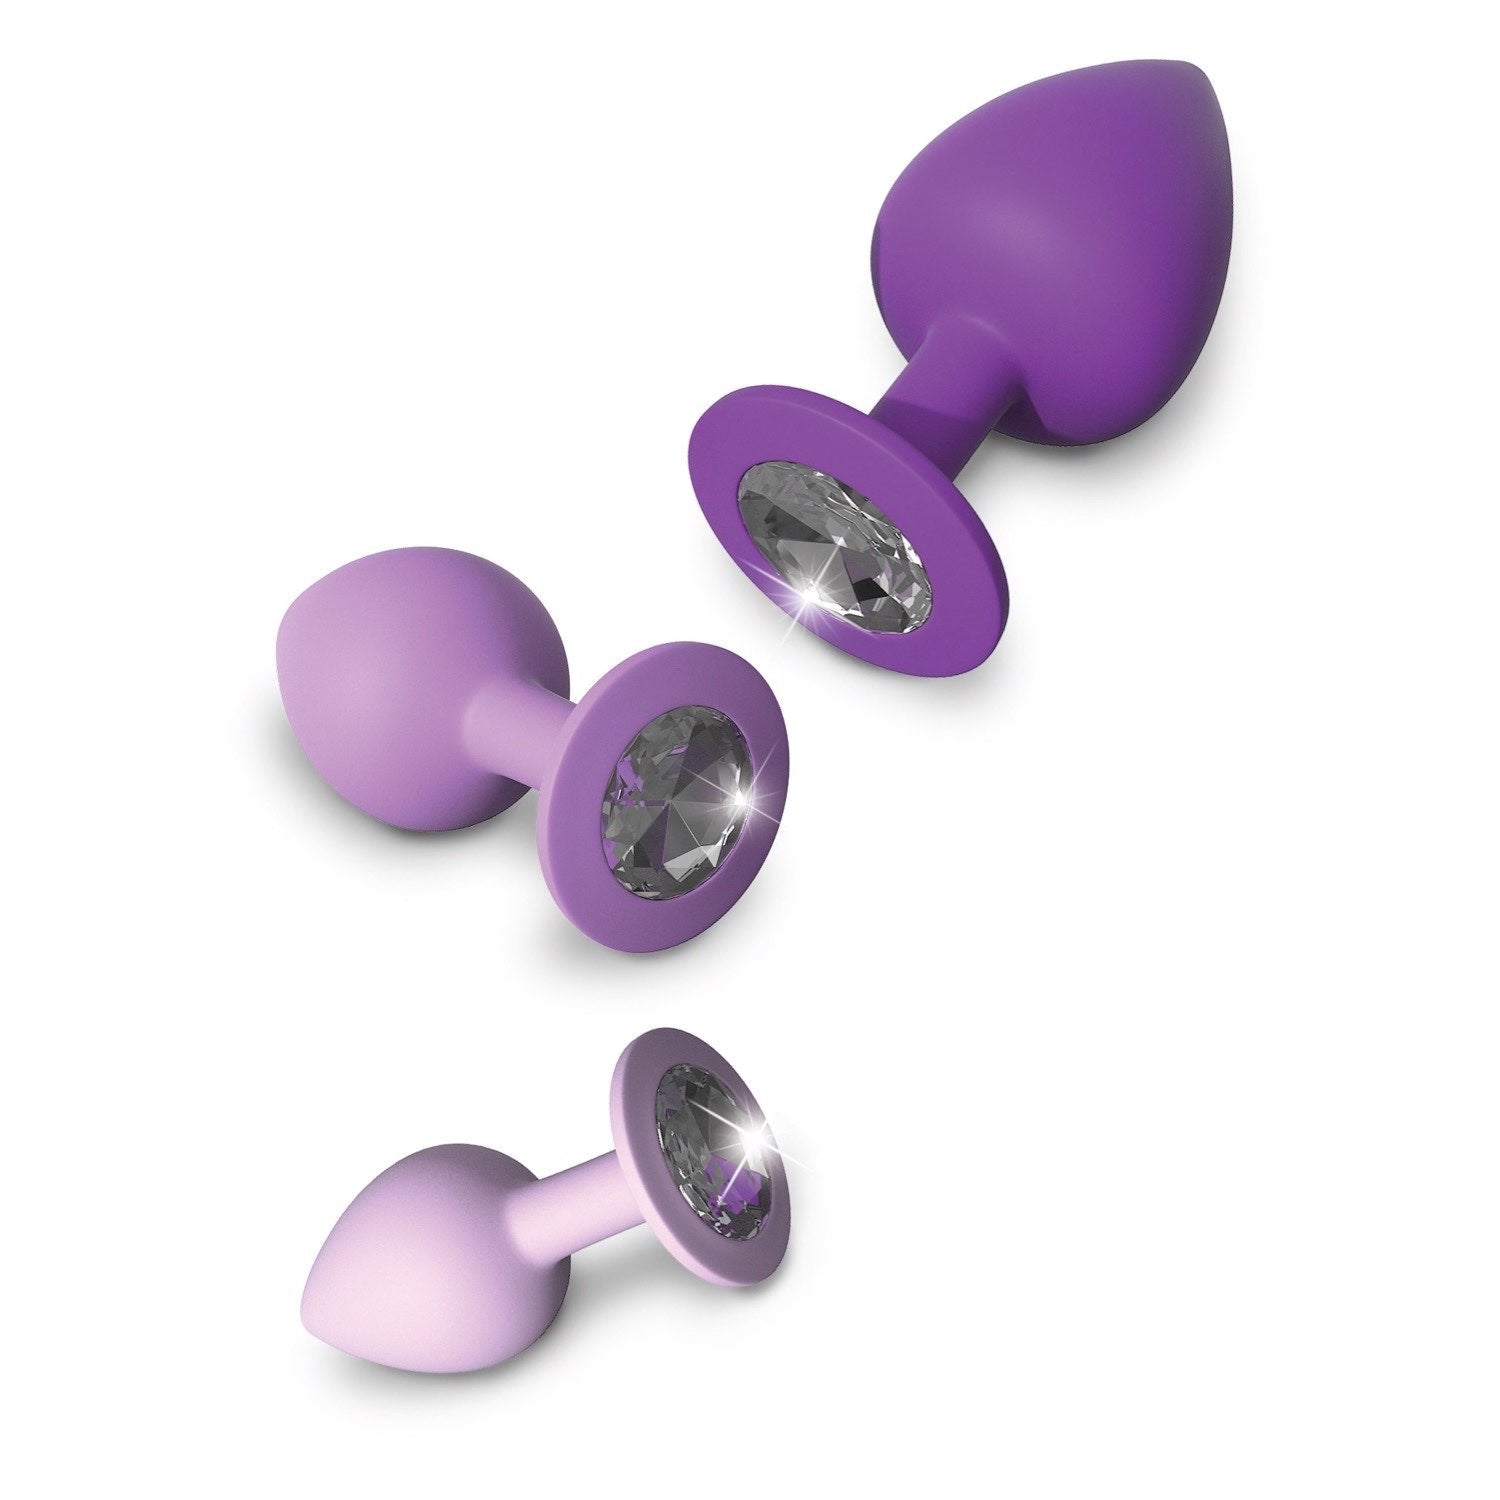 Fantasy For Her Little Gems Trainer Set - Purple Butt Plugs with Jewel Bases - Set of 3 Sizes by Pipedream